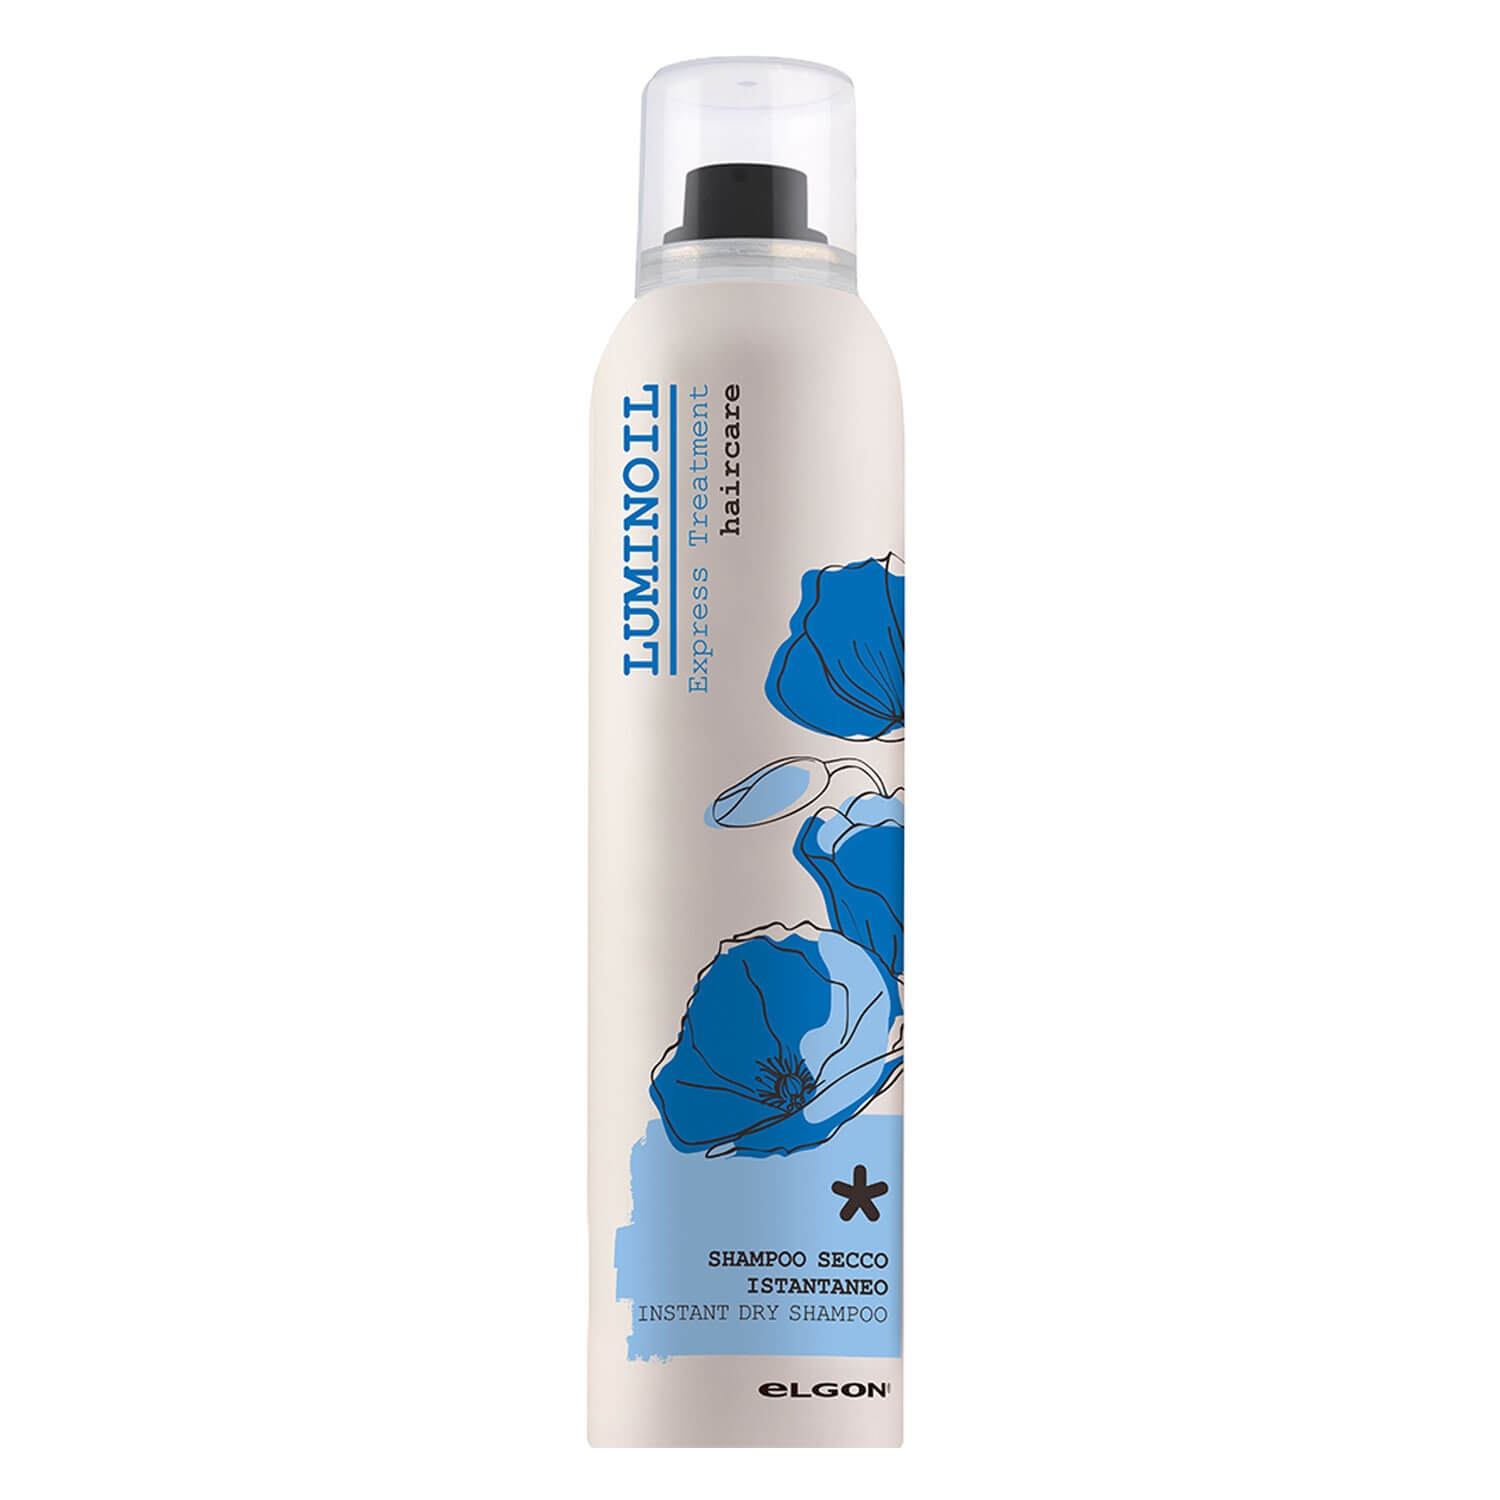 Product image from Luminoil - Instant Dry Shampoo